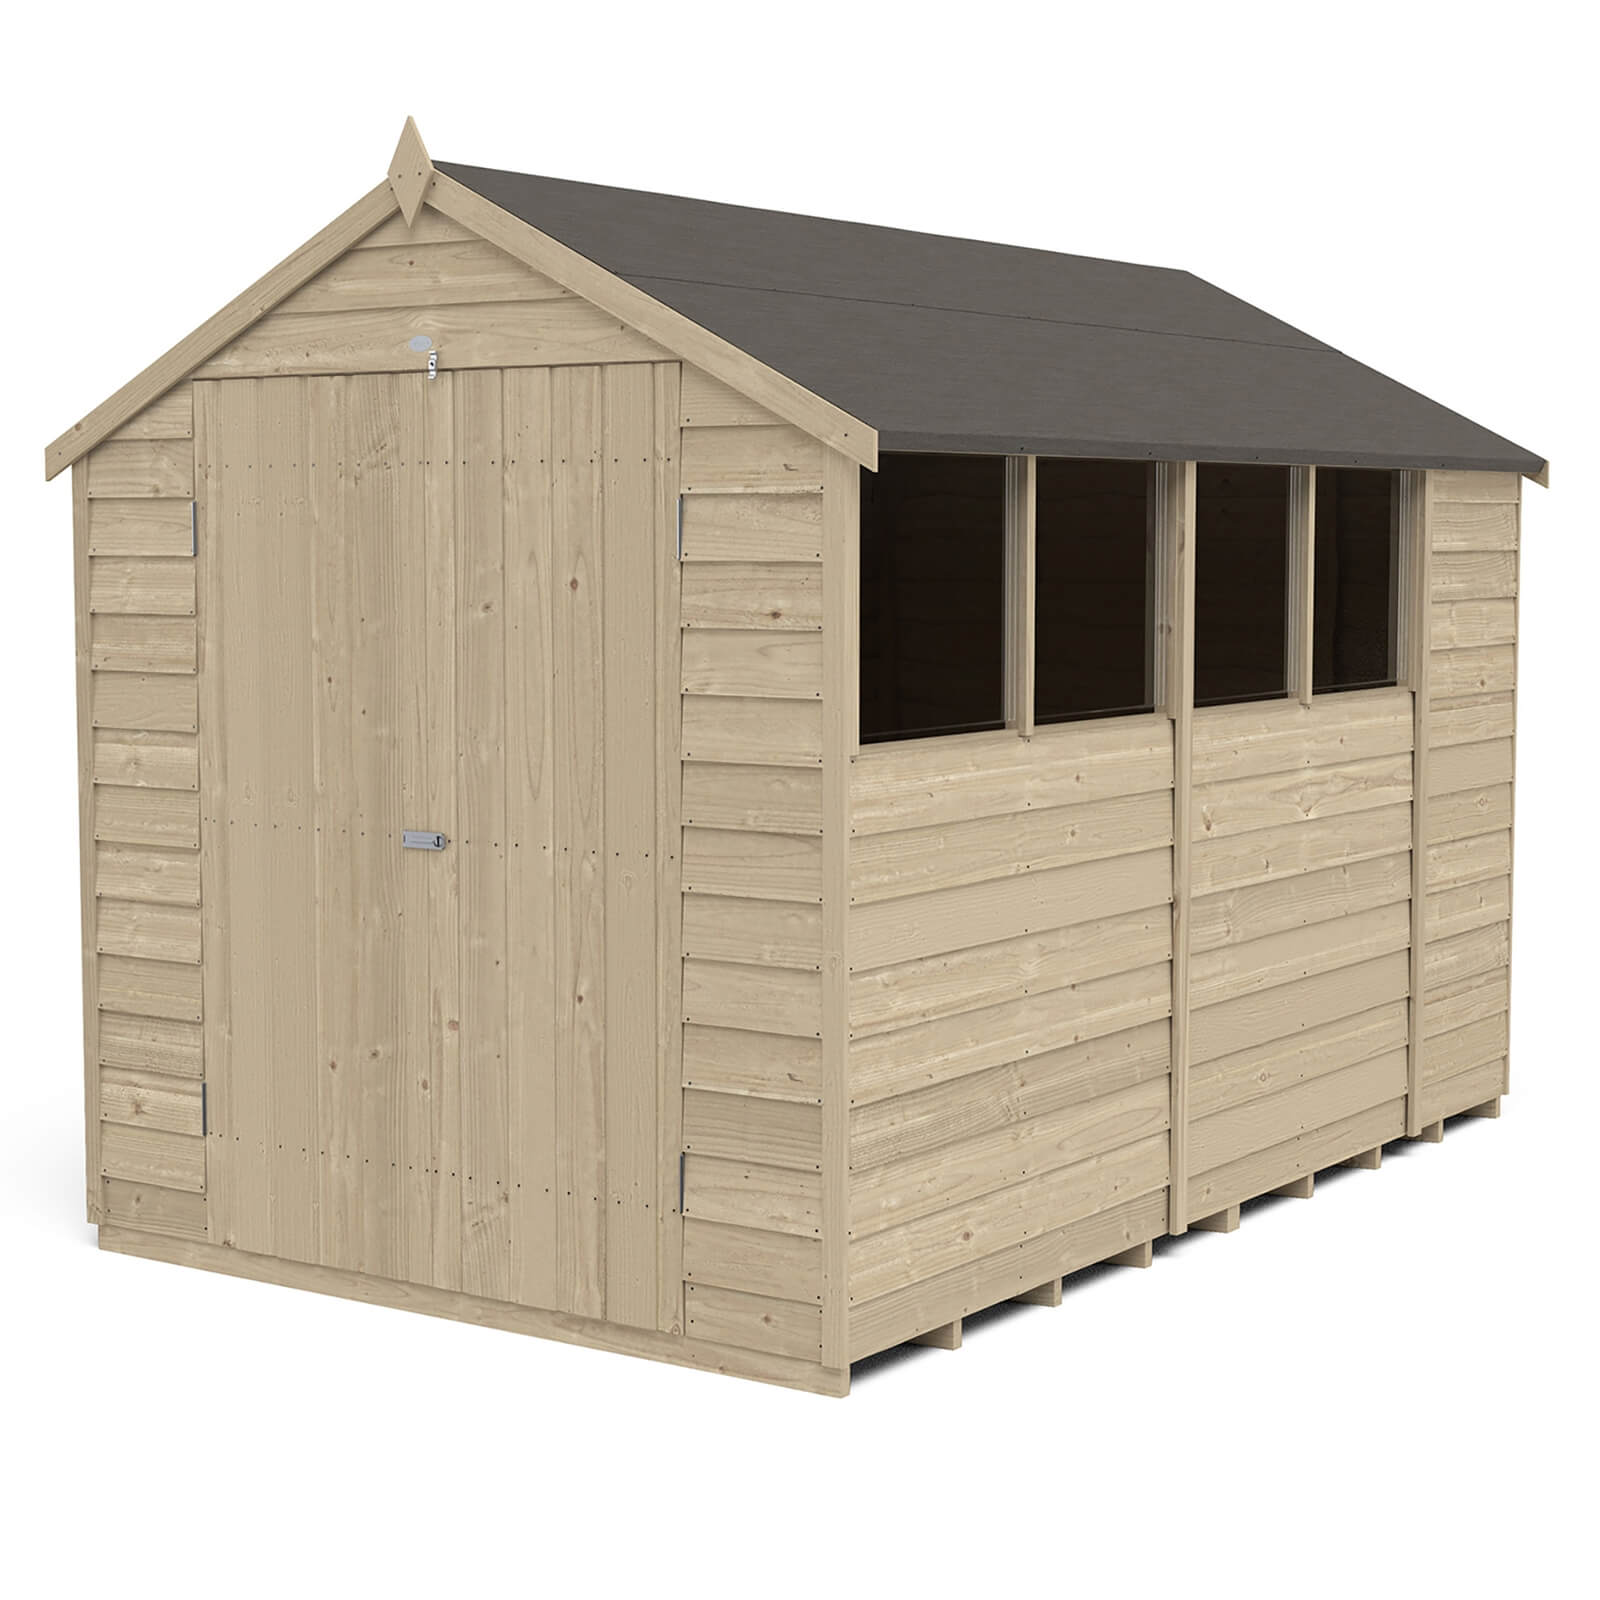 Forest 10 x 6ft Overlap Pressure Treated Apex Shed - Double Door -incl. Installation